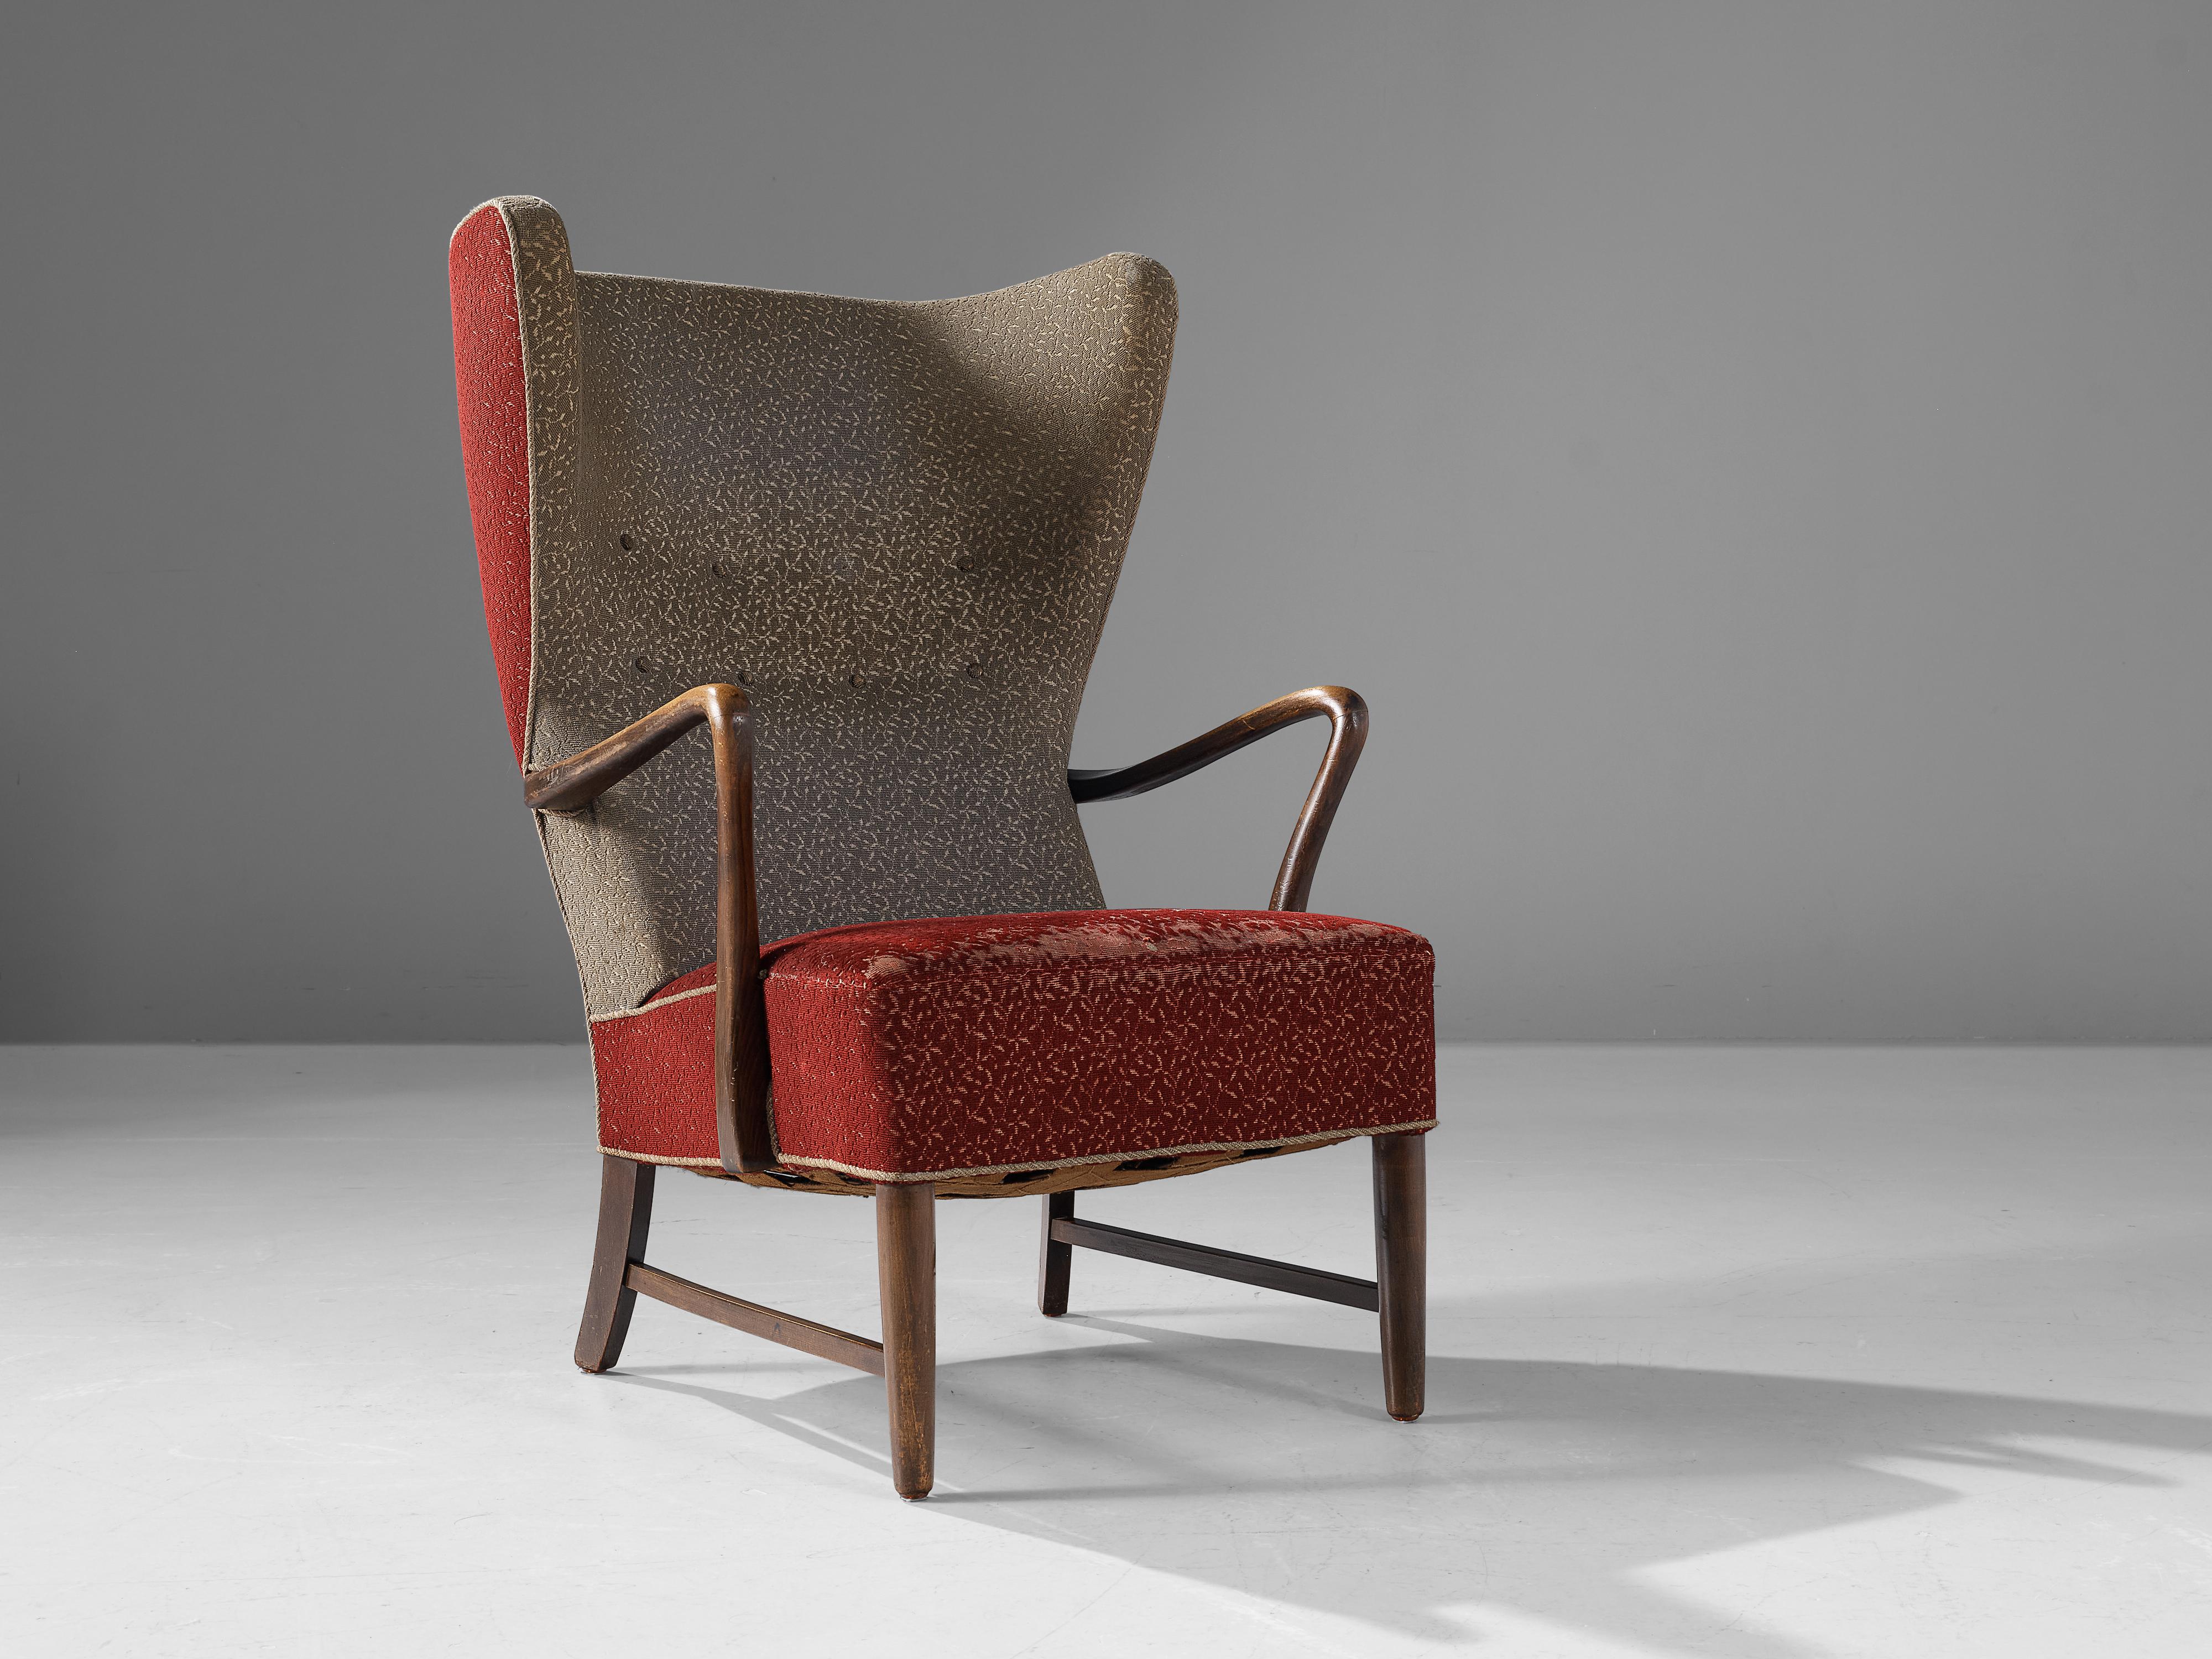 Easy chair, beech, fabric, Denmark, 1950s

Beautiful, organic armchair designed made in Denmark. This striking example of Scandinavian Modern design of the 1950s shows a grand curved, wingback backrest with tufted buttons. The ergonomically shaped